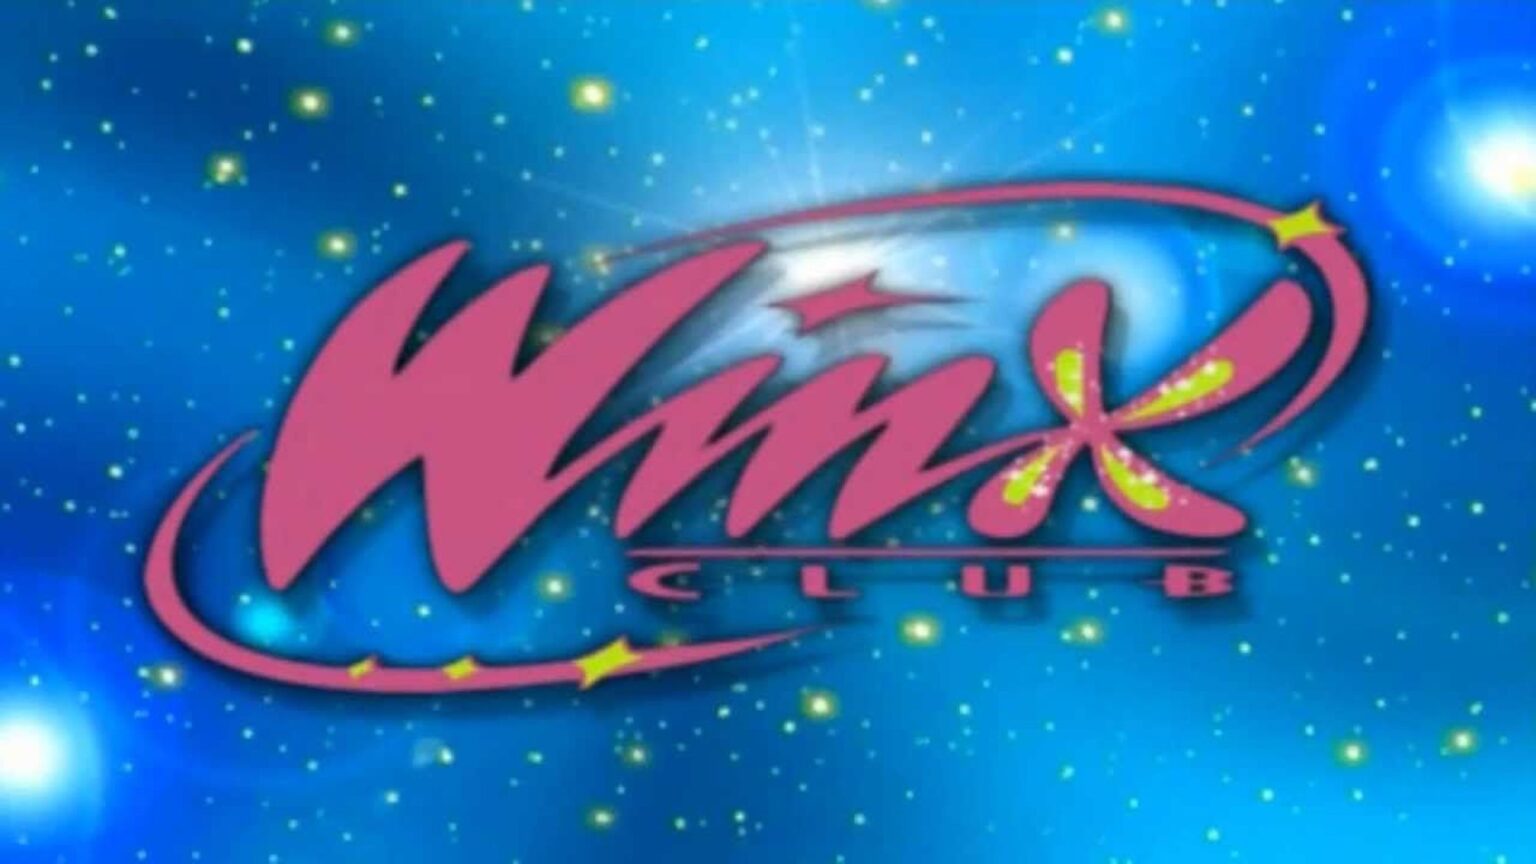 Let’s talk about mid to late 00 animated series, shall we? Specifically, let’s talk about the 'Winx Club'. What's happening to the characters?